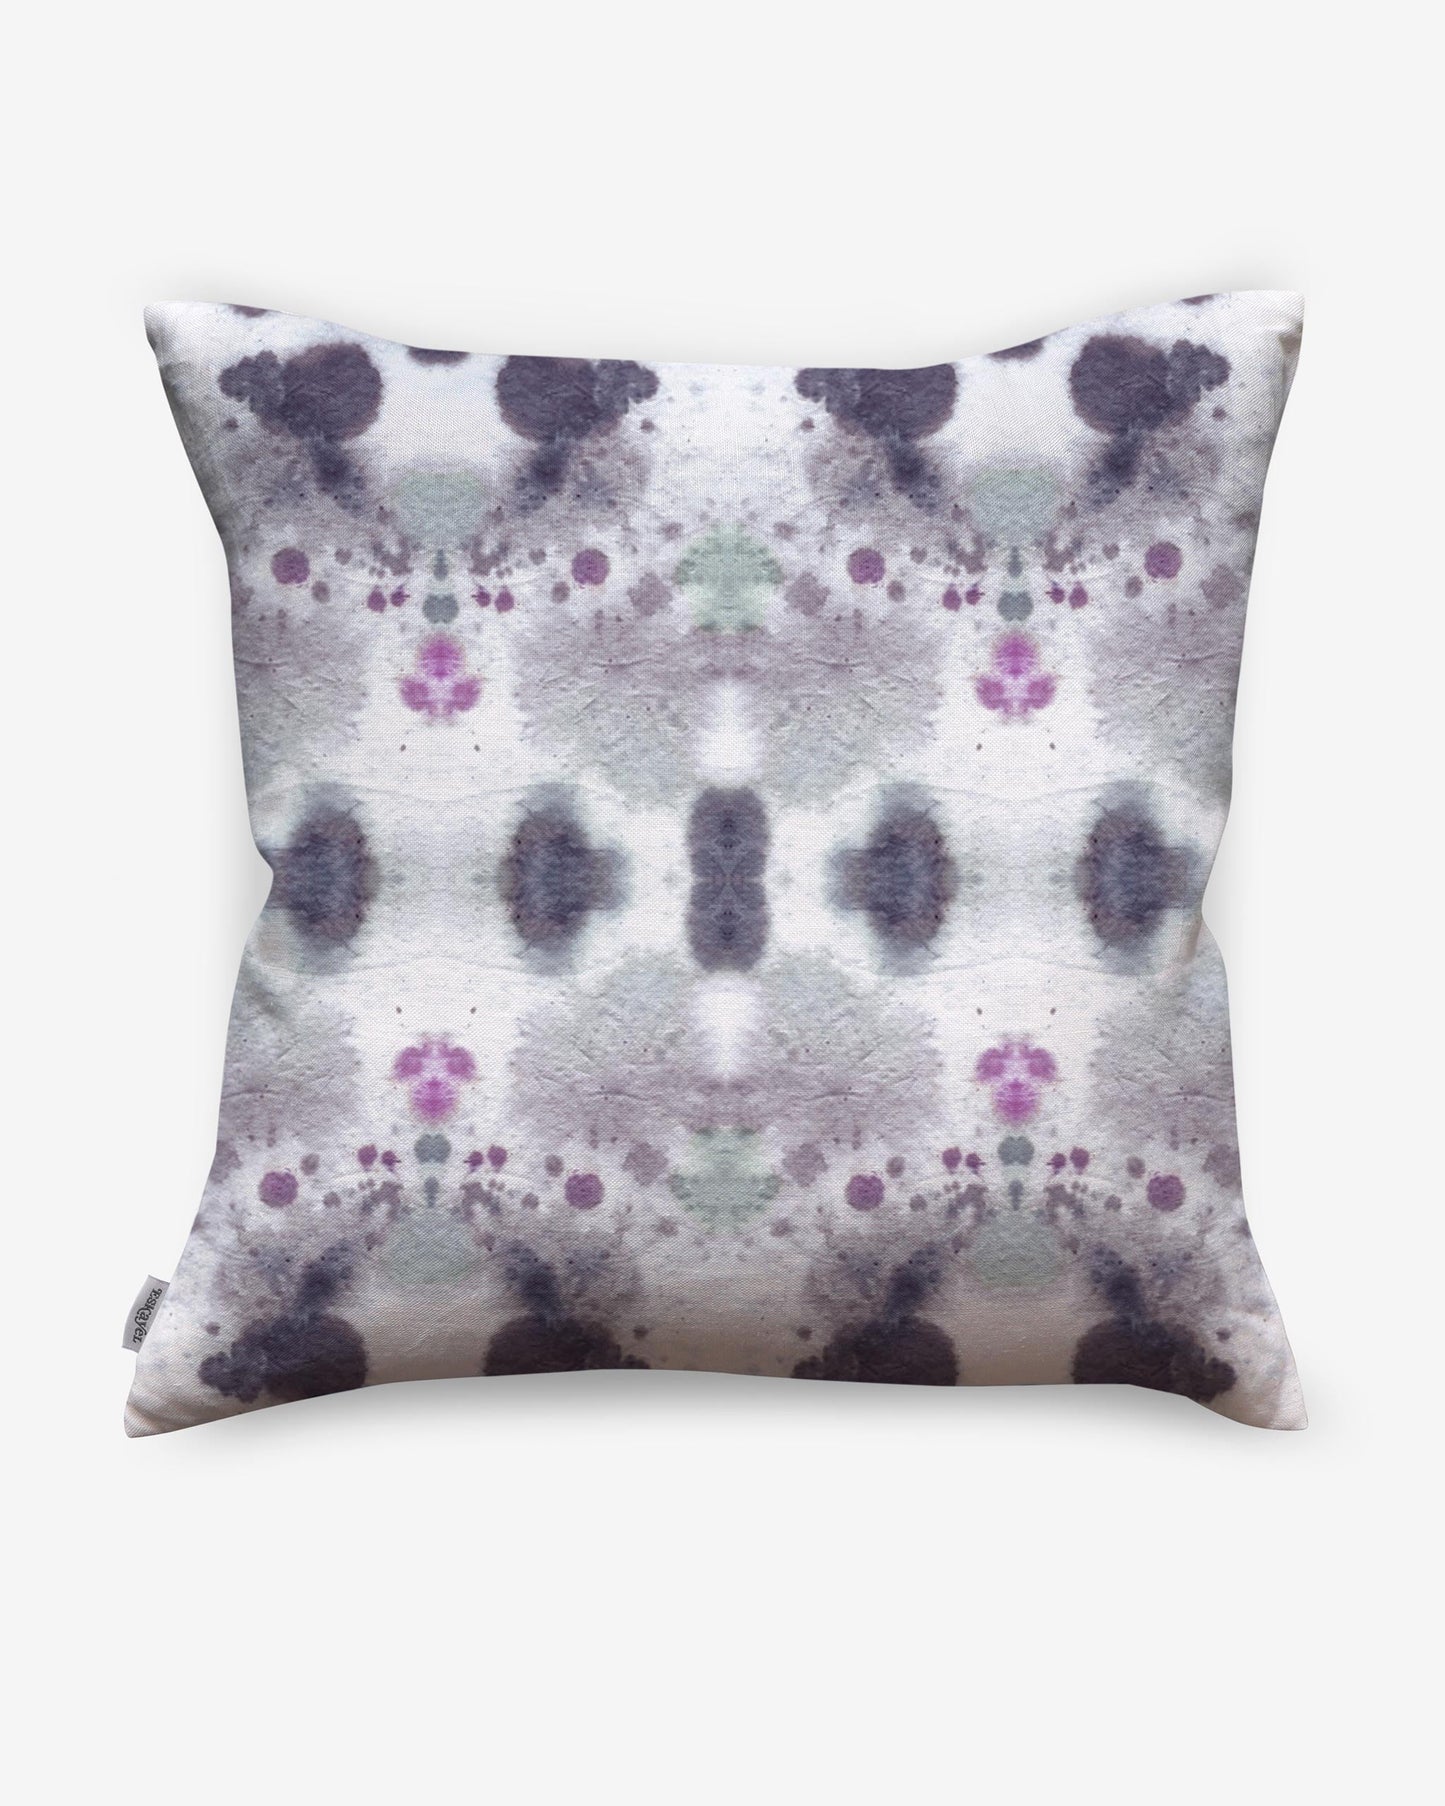 A Species Pillow||Indigo with purple and green flowers on it creates a kaleidoscopic effect.